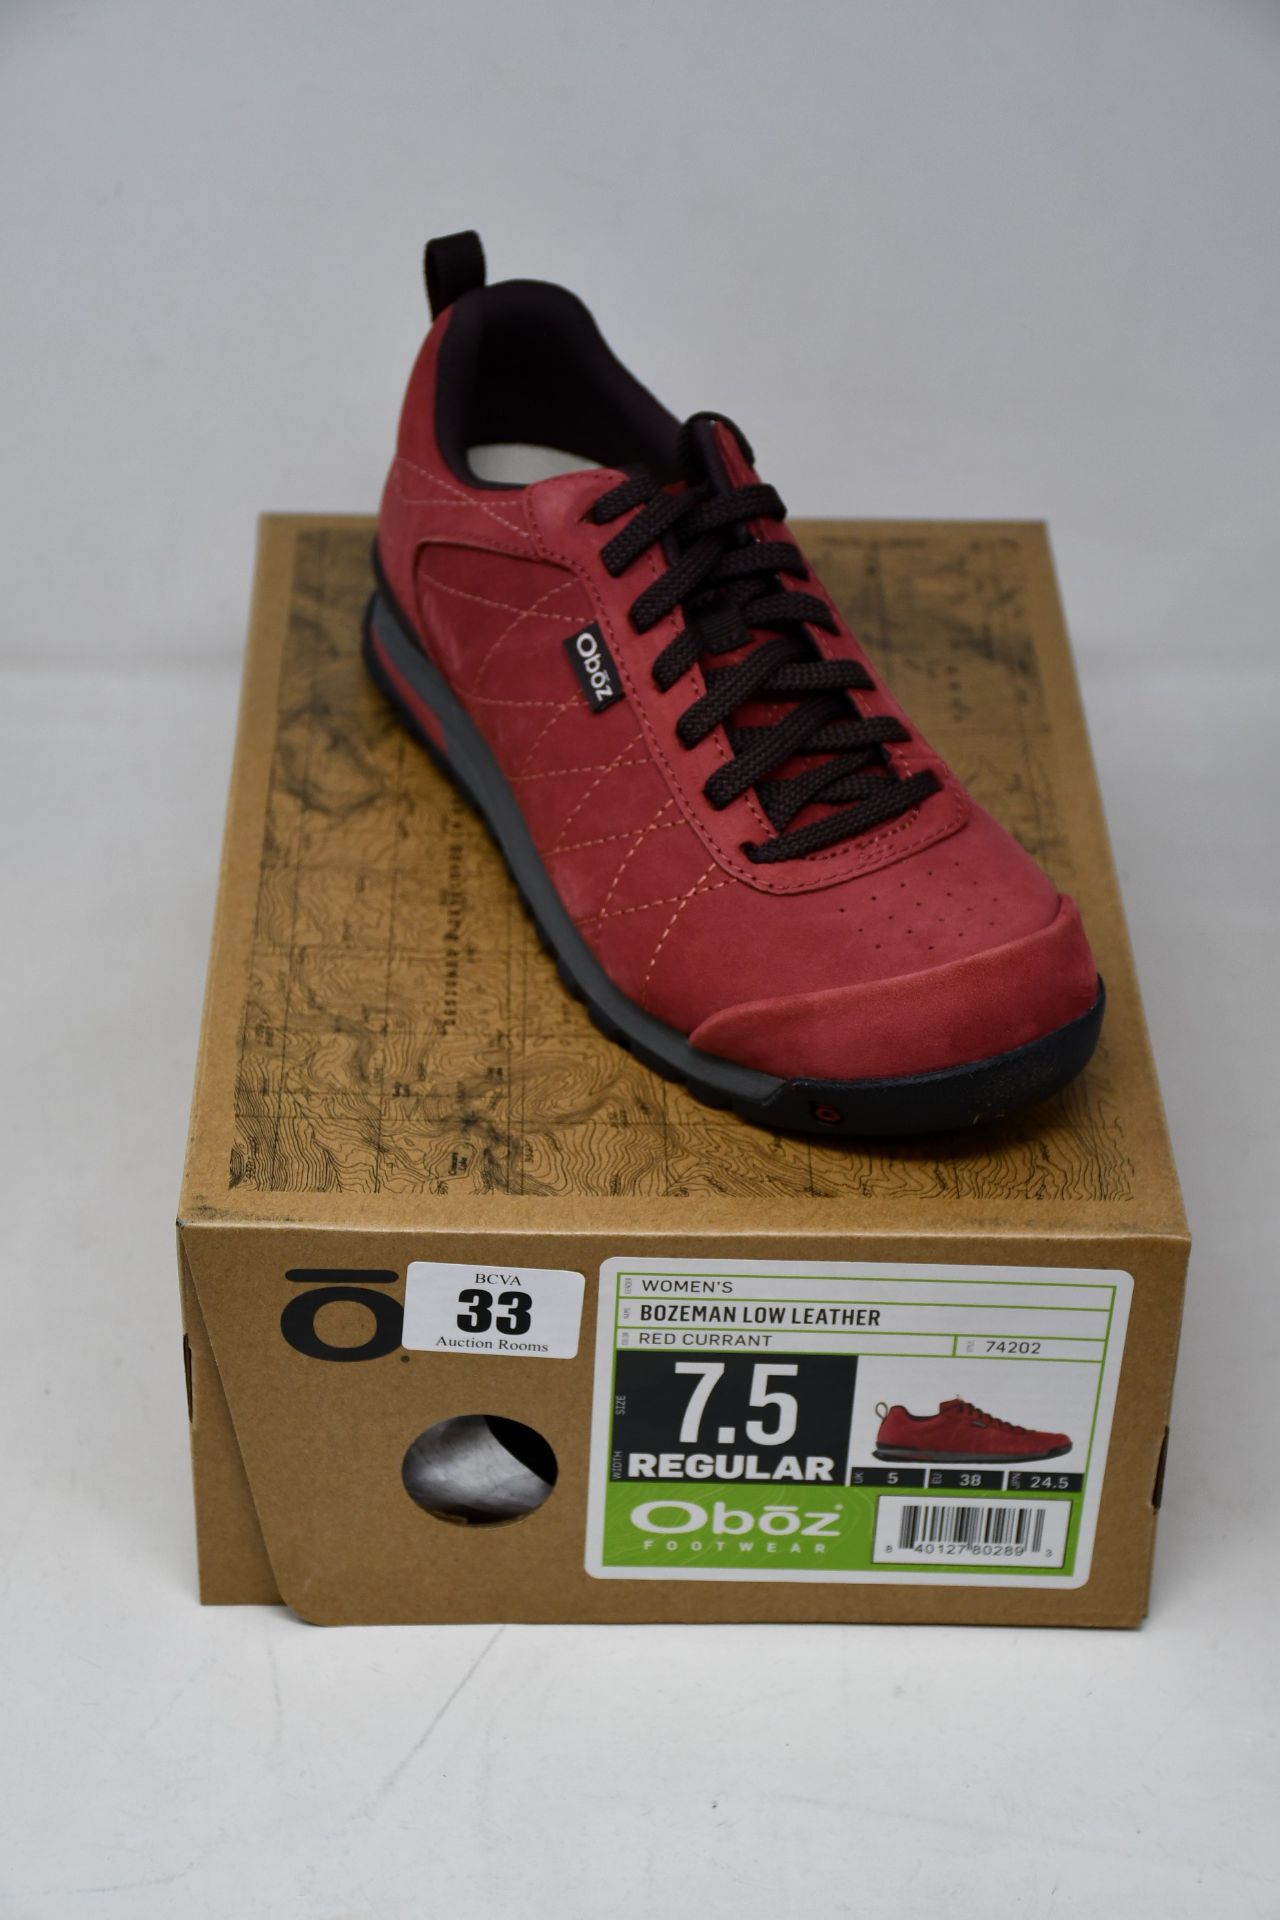 A pair of women's as new Oboz Bozeman low leather shoes (UK 5).